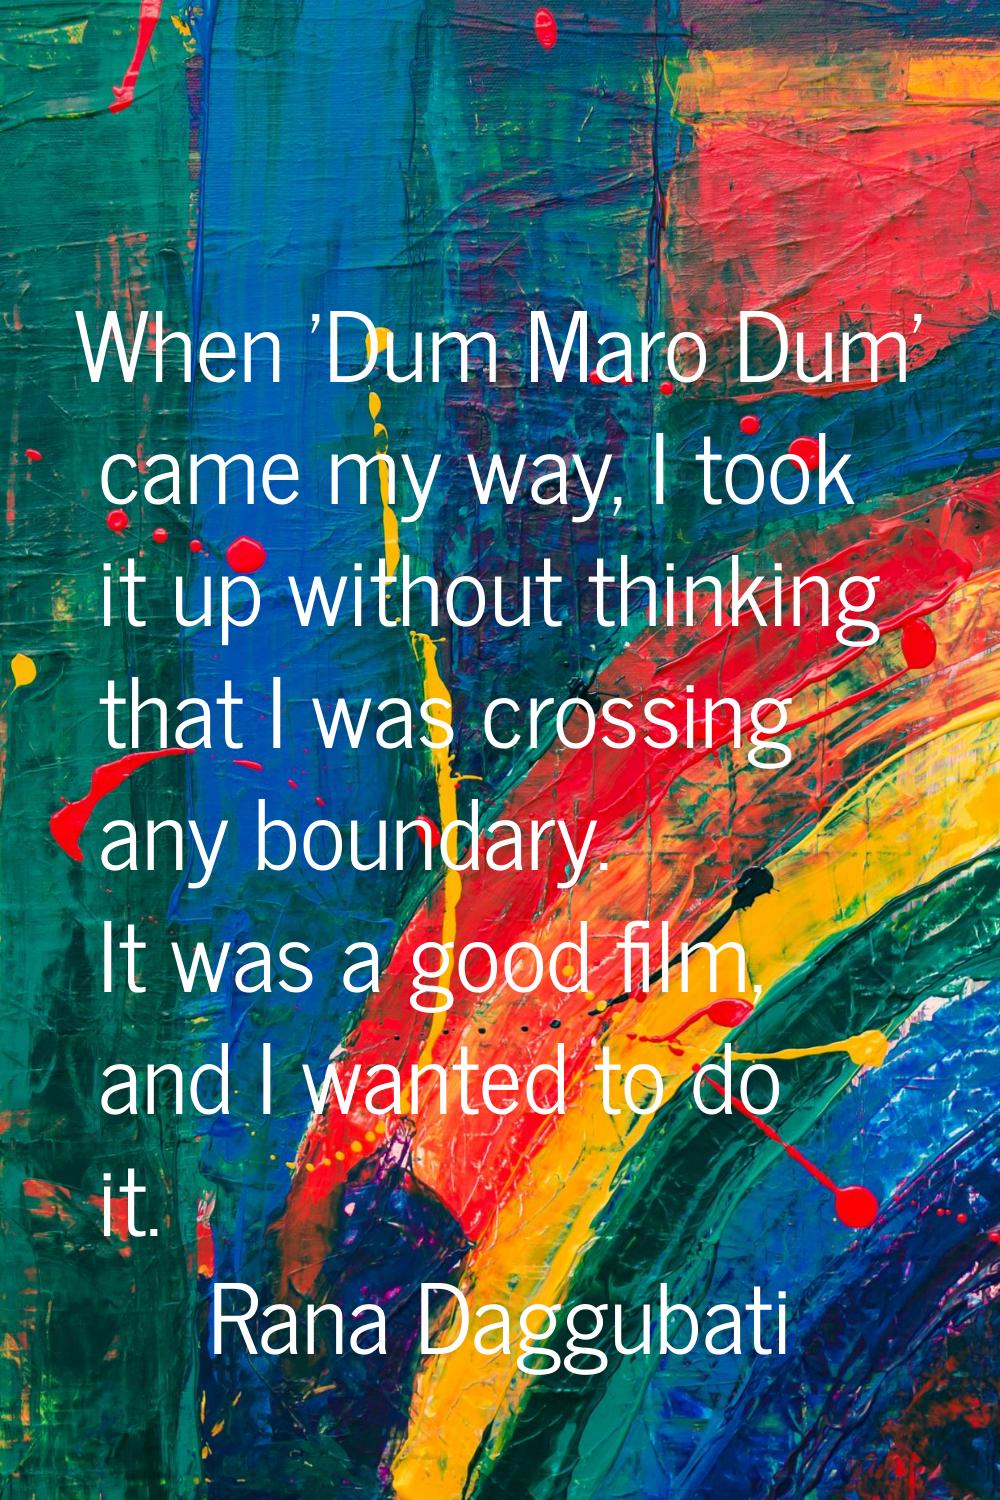 When 'Dum Maro Dum' came my way, I took it up without thinking that I was crossing any boundary. It